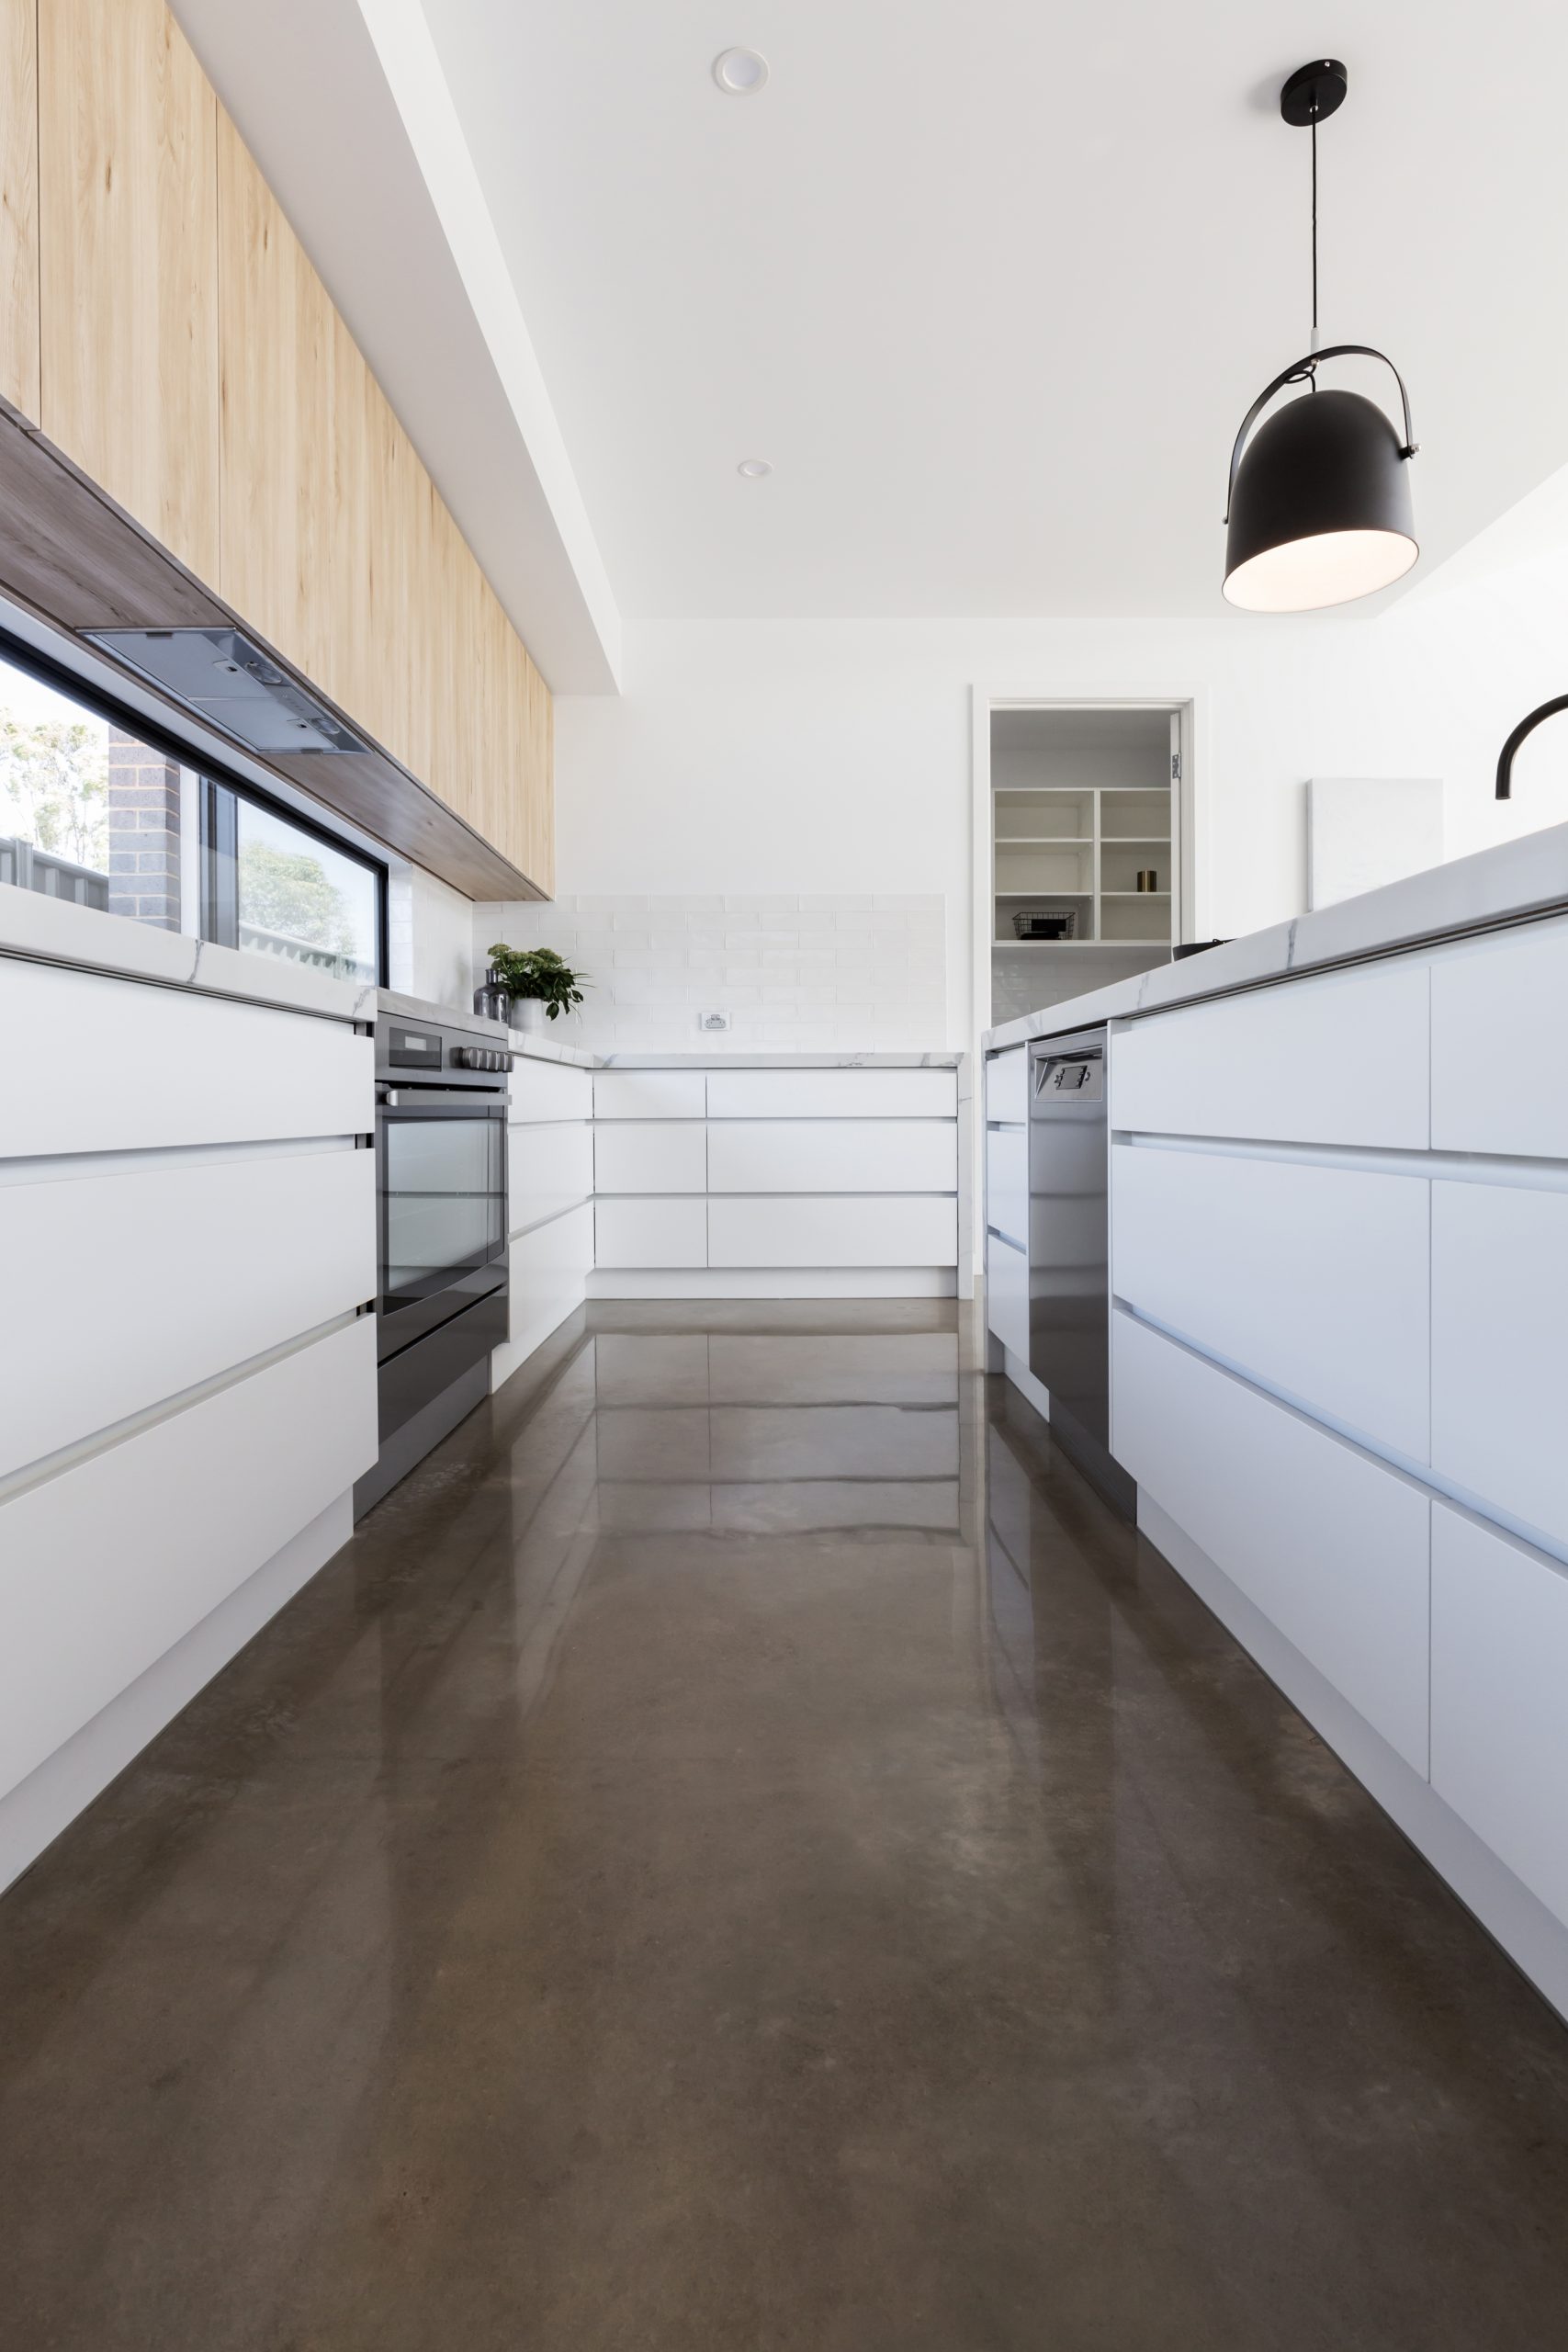 Enhance And Protect Your Kitchen With Protective Epoxy Coating